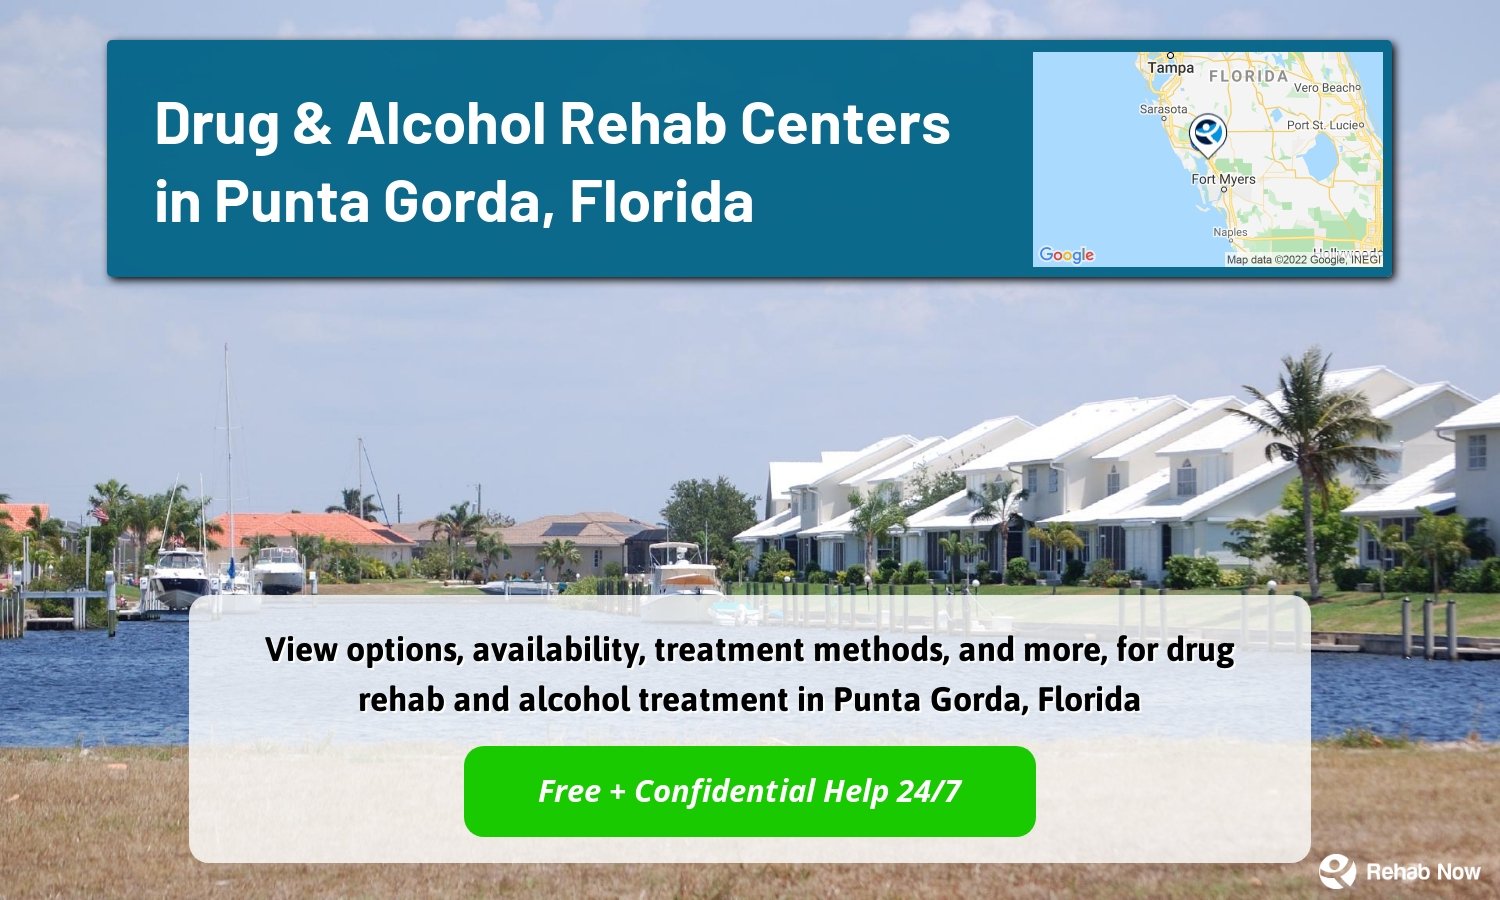 View options, availability, treatment methods, and more, for drug rehab and alcohol treatment in Punta Gorda, Florida